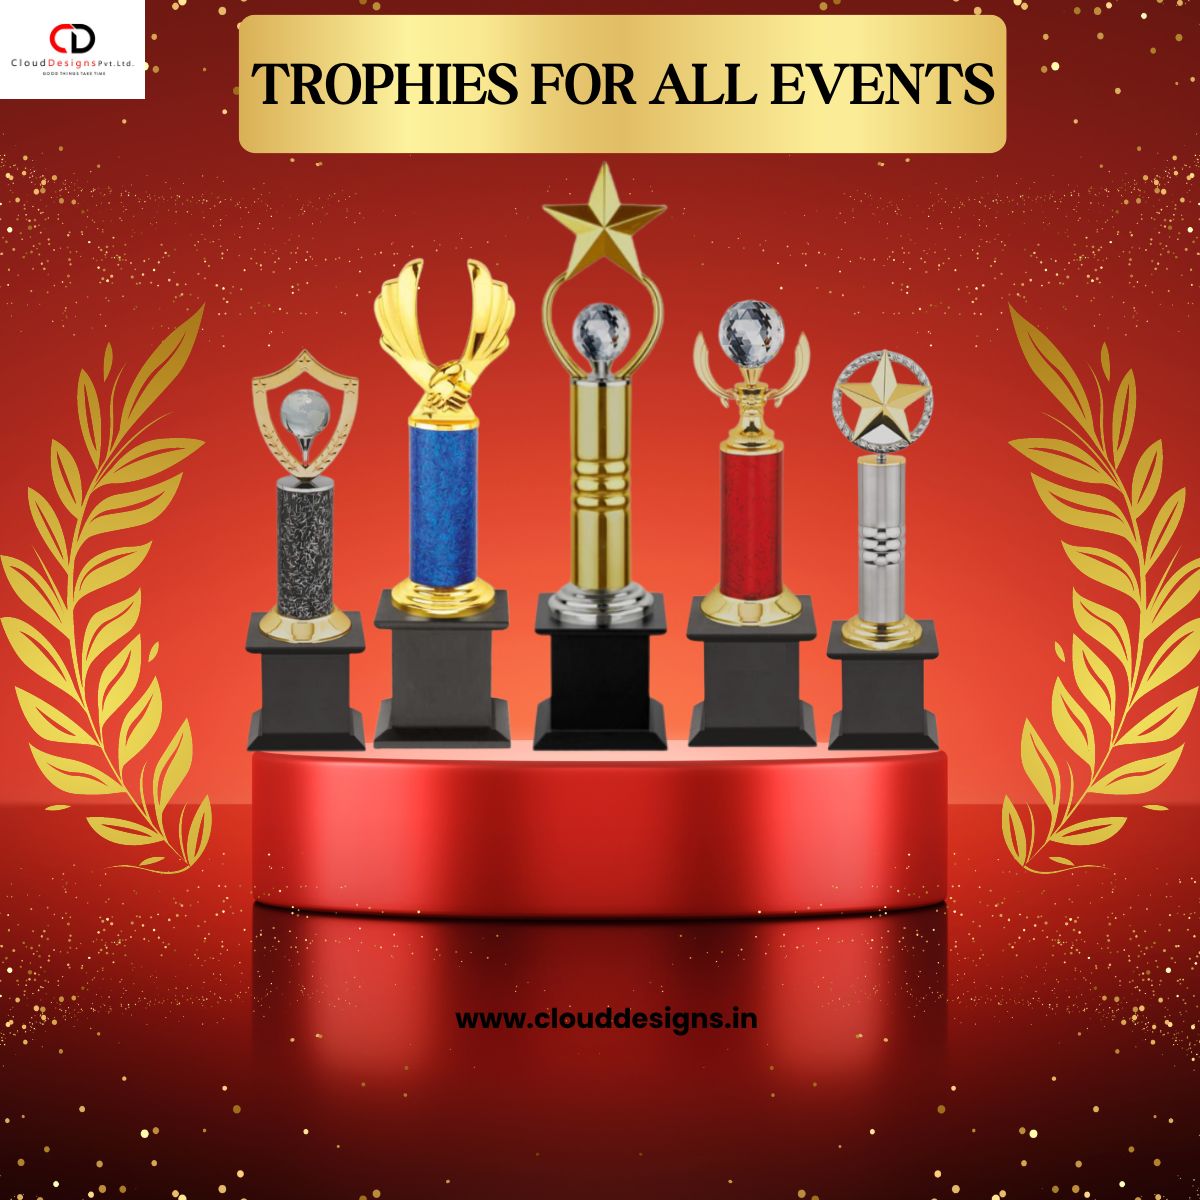 'Honor Your Champions: Design Your Own Trophy to Celebrate Their Accomplishments!'
#CustomTrophies
#PersonalizedAwards
#CelebratingSuccess
#TrophyDesign
#SpecialOccasions
#CorporateAwards
#CustomizableDesigns
clouddesigns.in
Contact-9894417506 /
+91 99659 98864